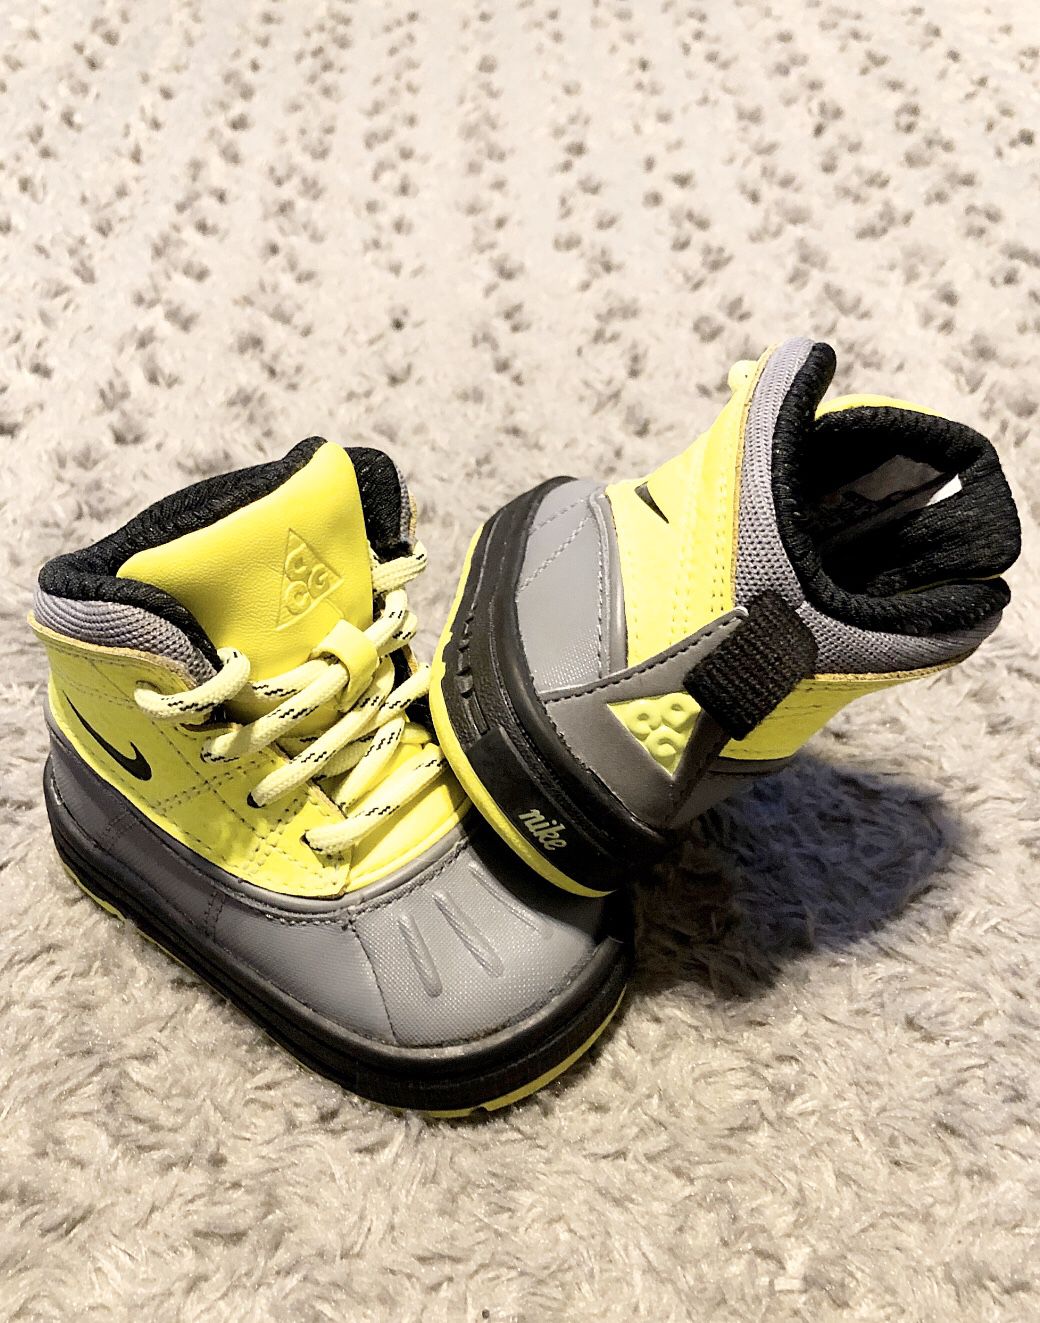 Toddler Nike Woodside 2 High Boots paid $49 size 3C Like New! Great condition Style# 524874